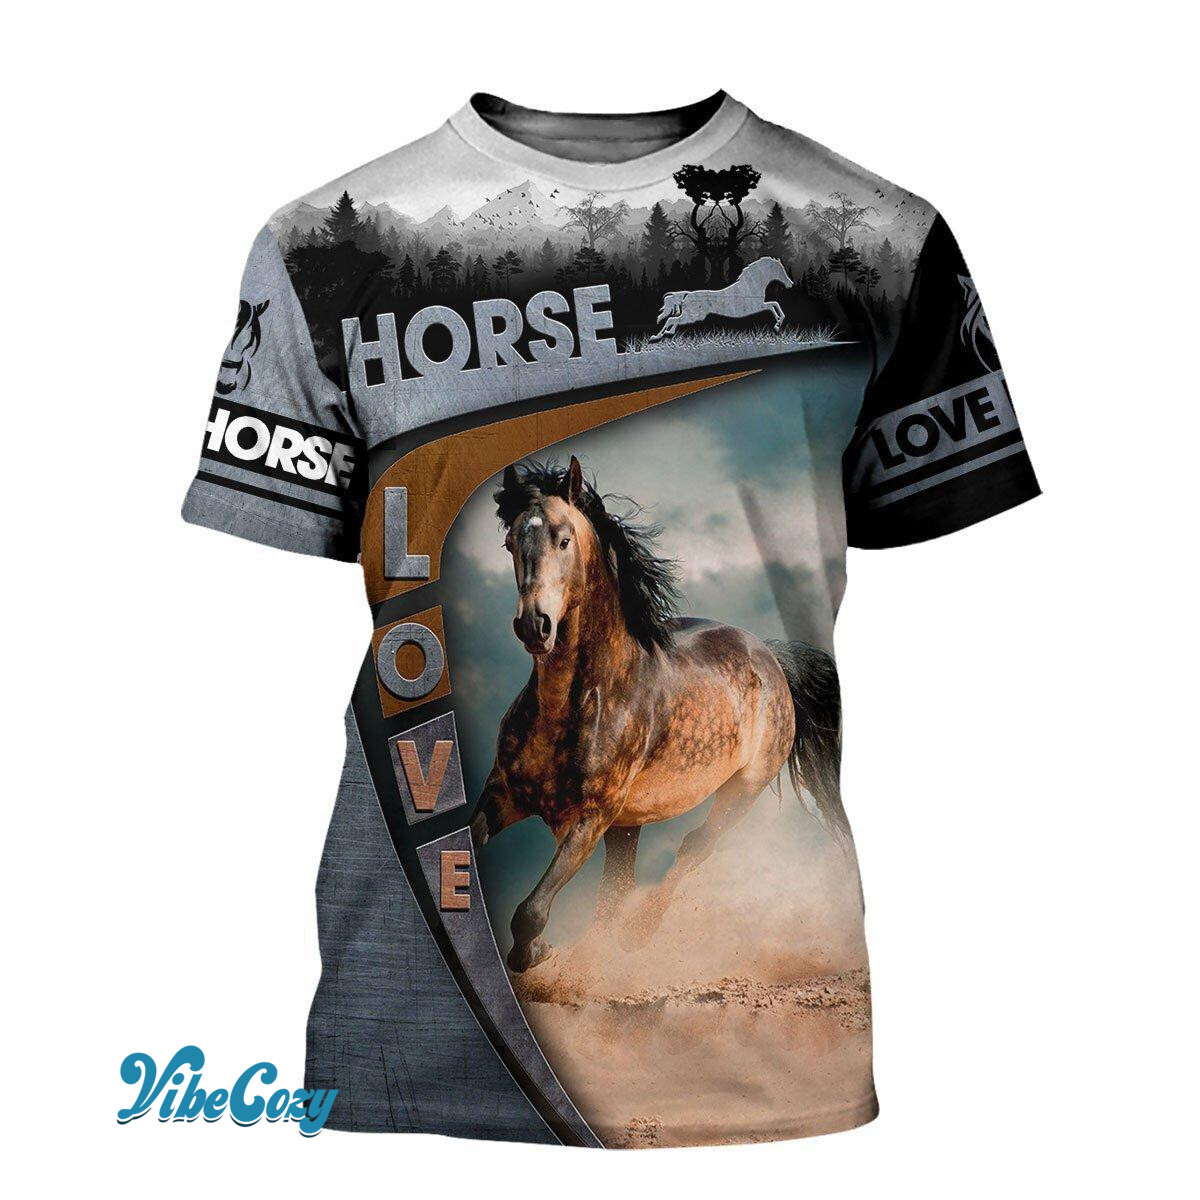 Love Horse 3D All Over Printed Shirt Hoodie For Men And Women MP050404